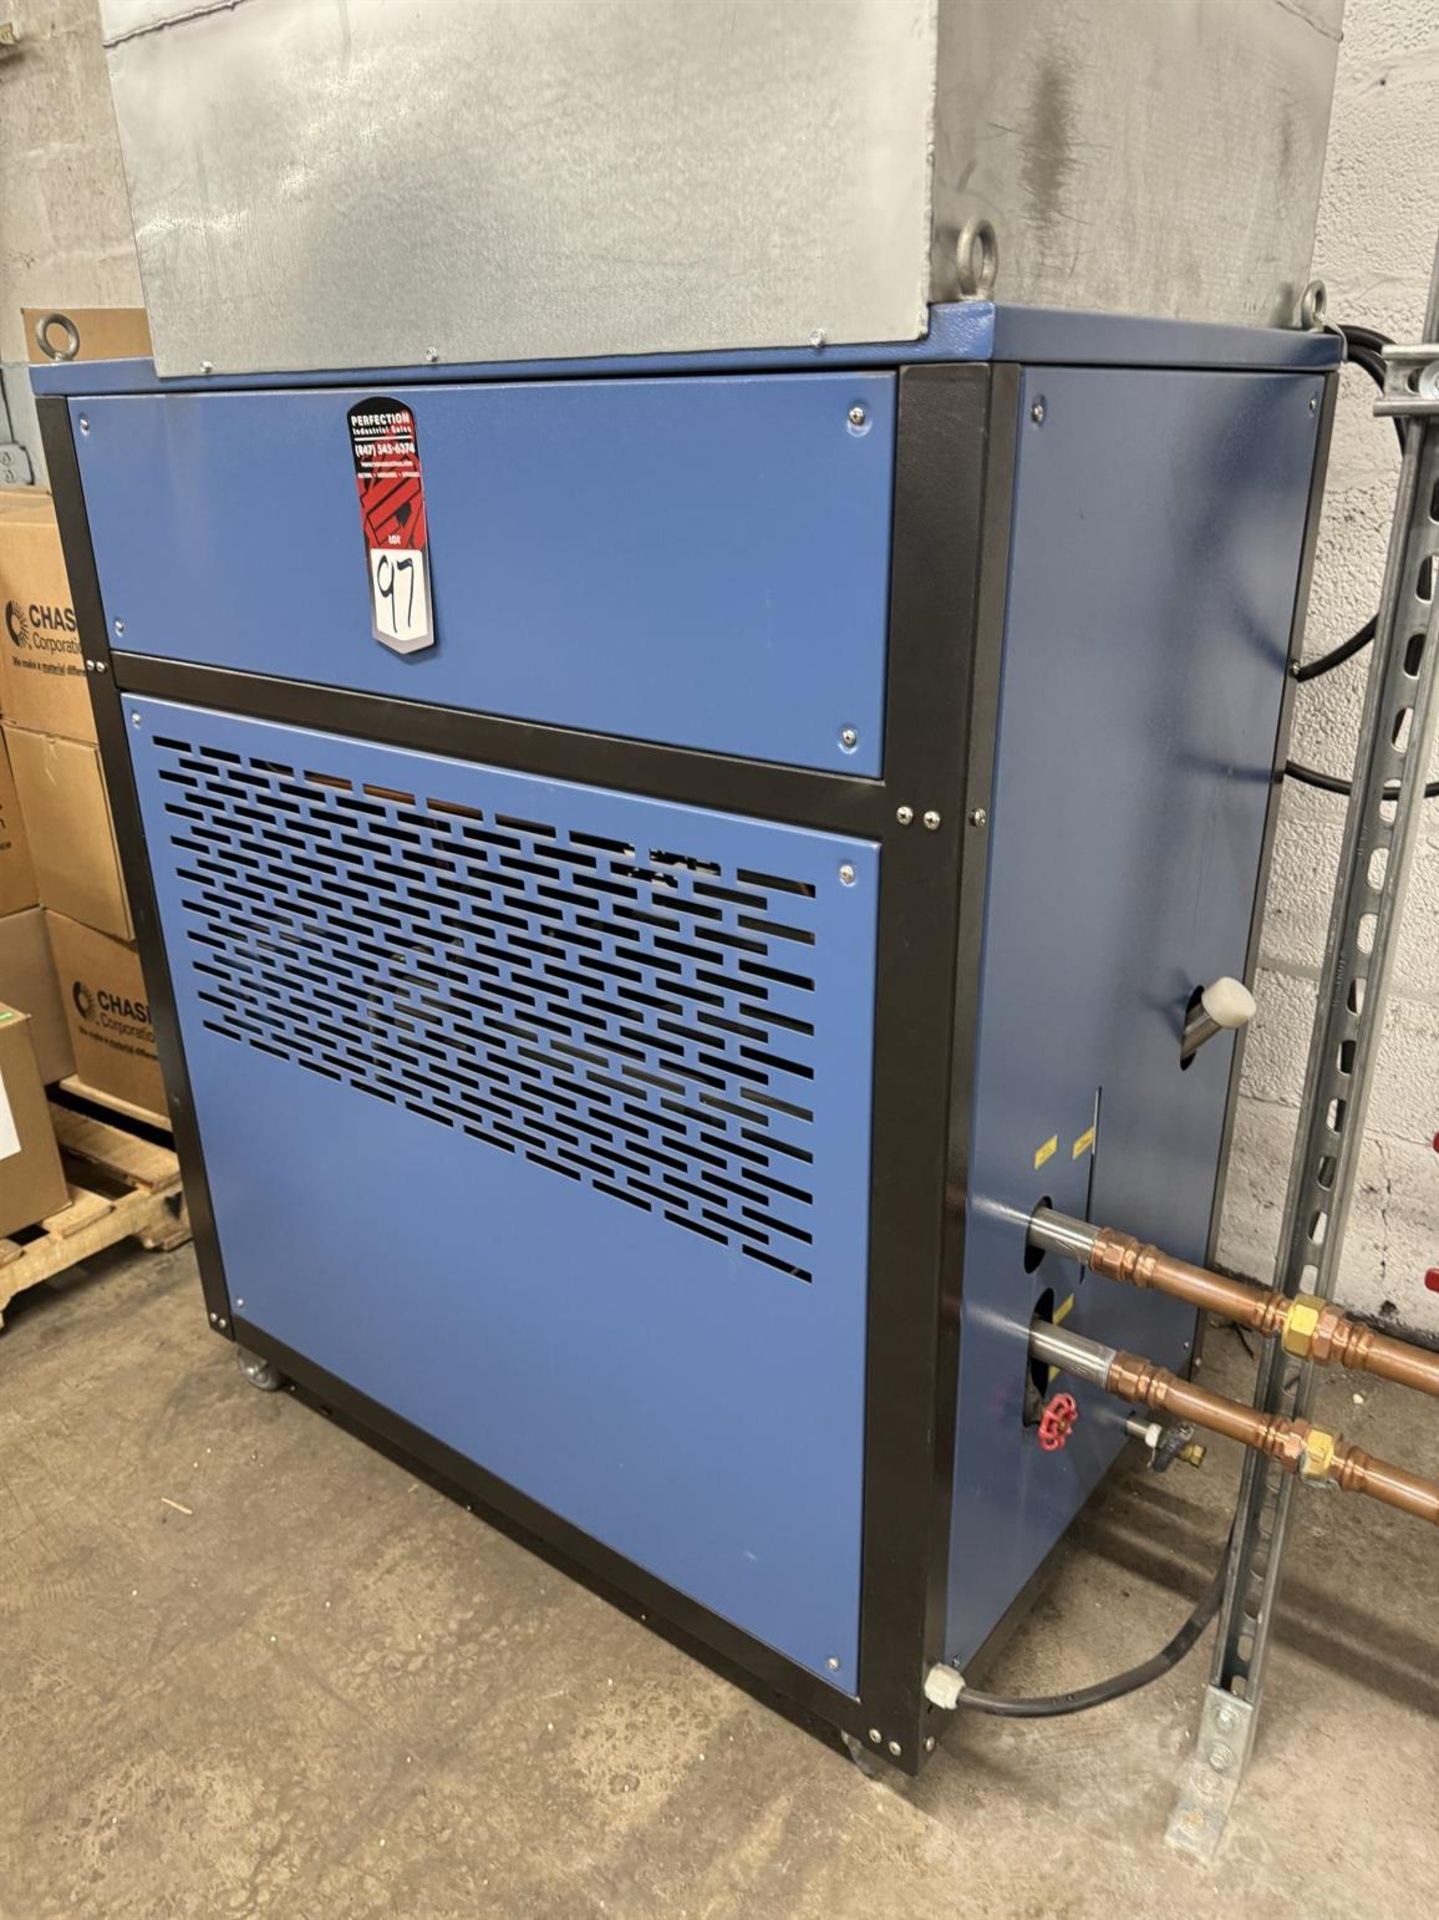 2019 PACIFIC RIM MACHNERY PRM-HC-05PACI 5Ton Chiller, s/n 2019AAFX0705 - Image 6 of 6